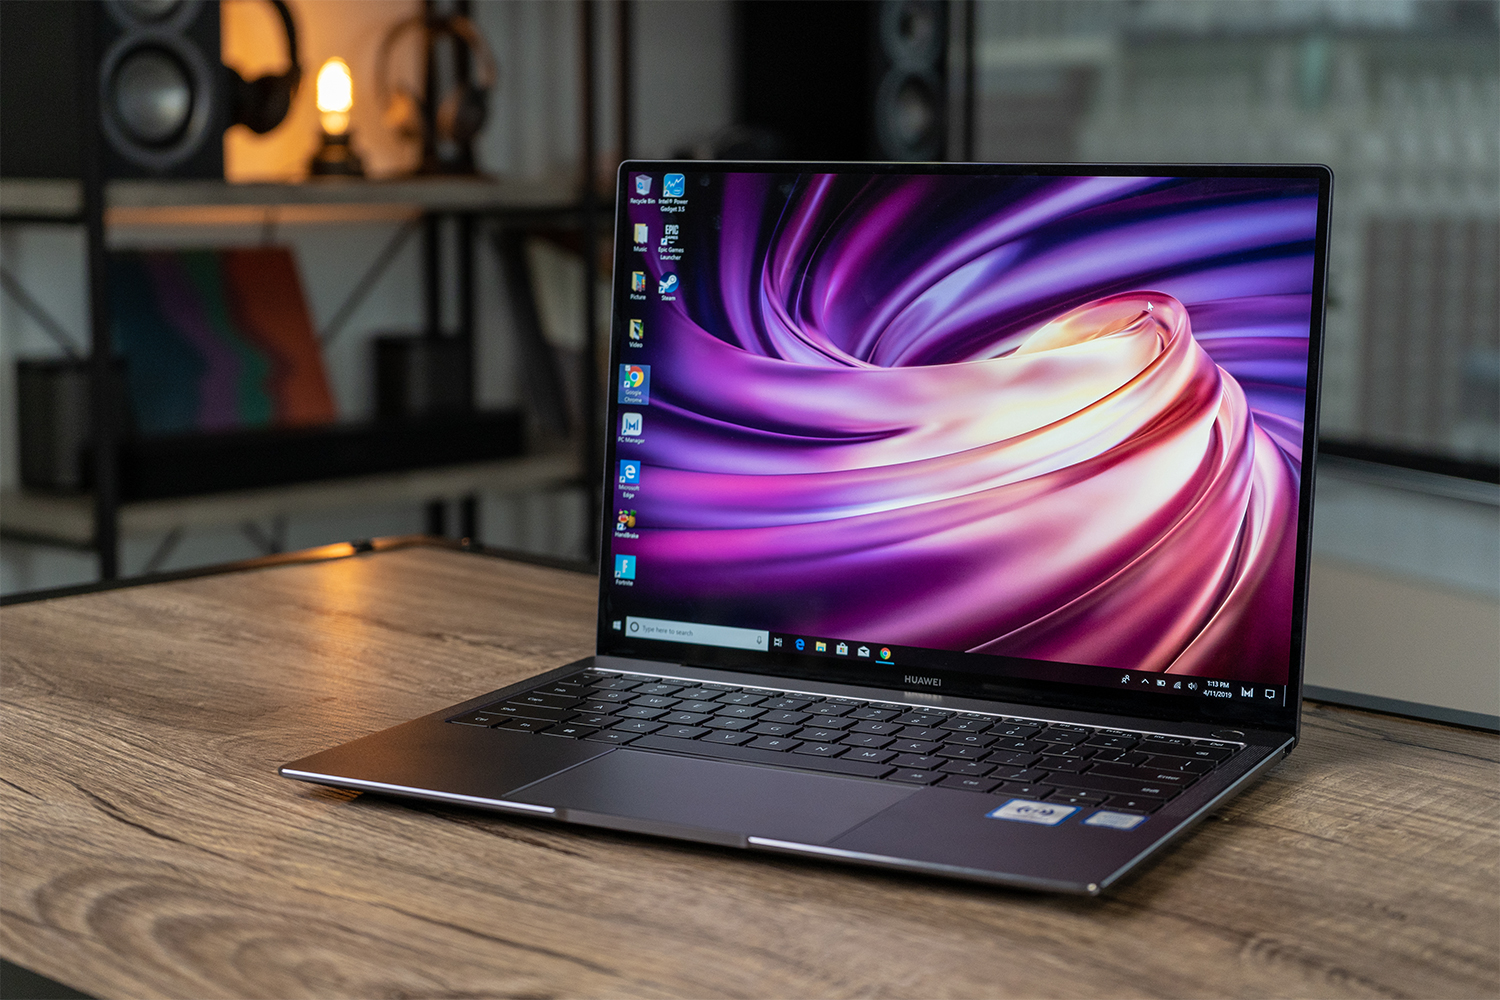 Huawei MateBook X Pro review: The MateBook X Pro squeezes some big